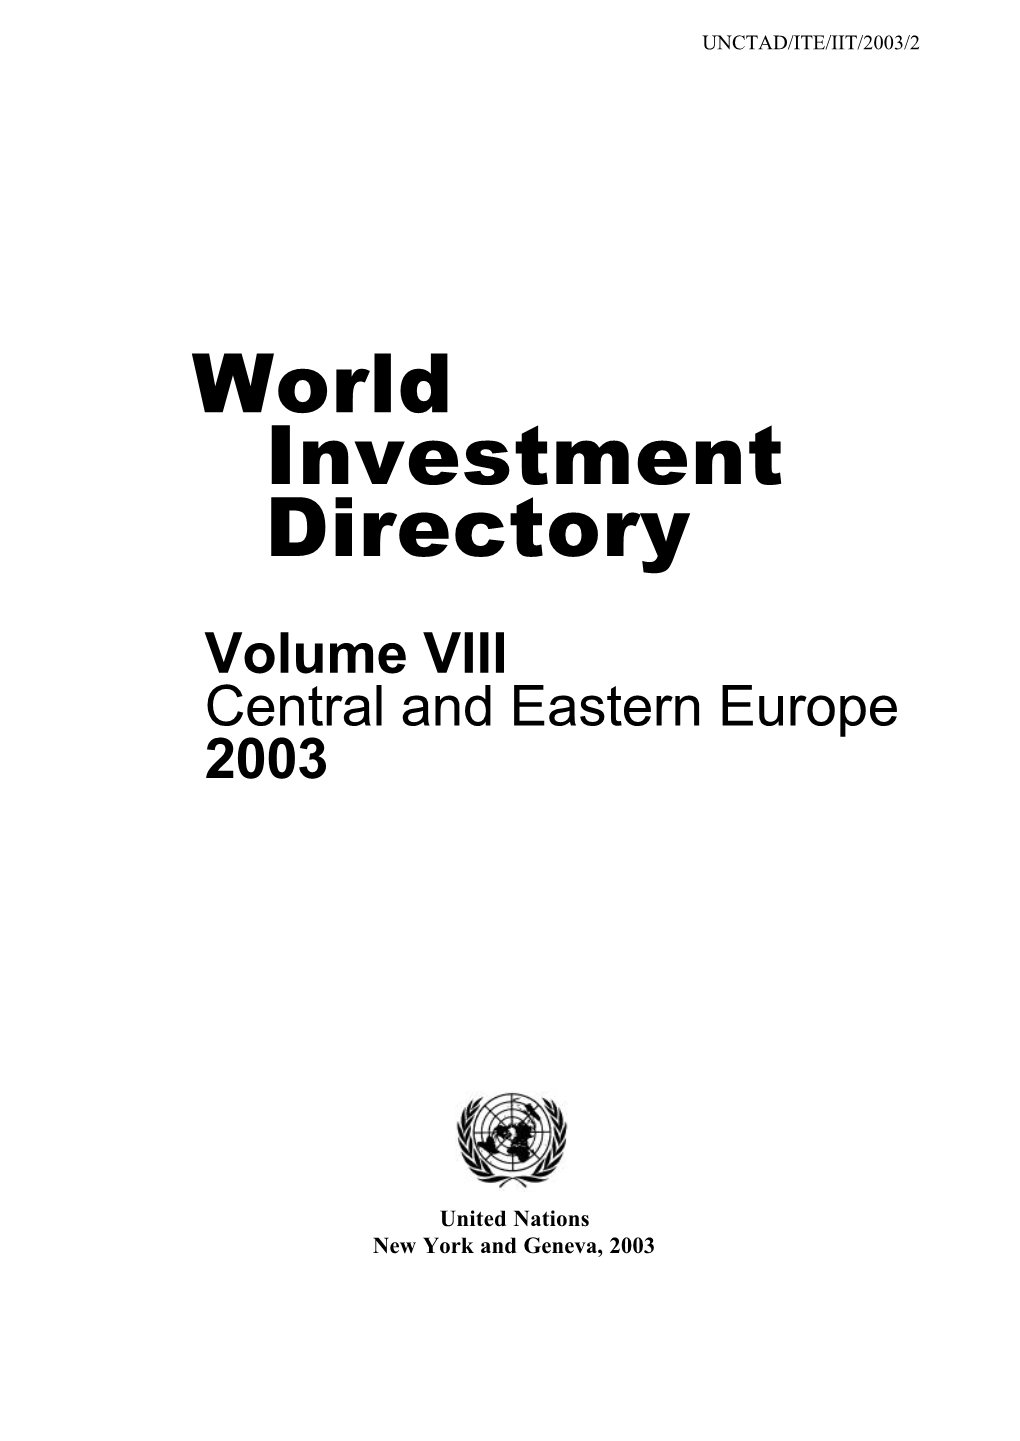 World Investment Directory